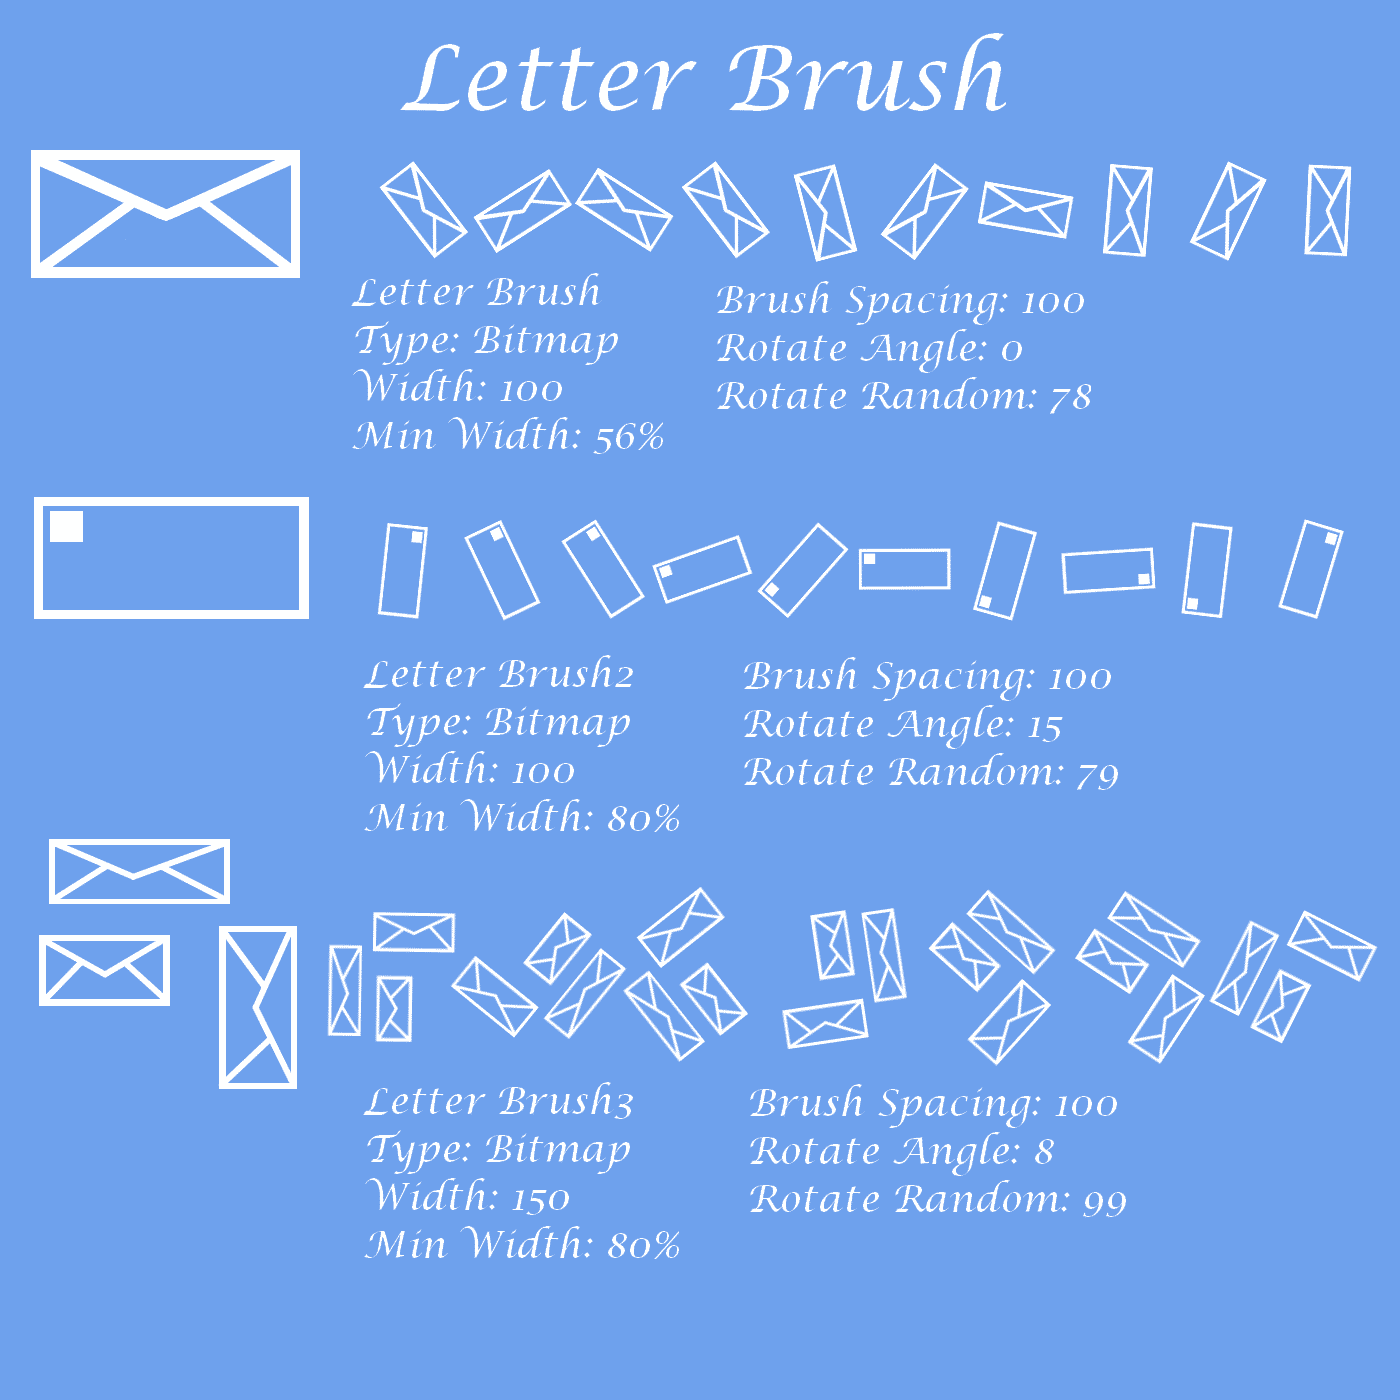 45. Letters Brushes and Envelopes Brushes